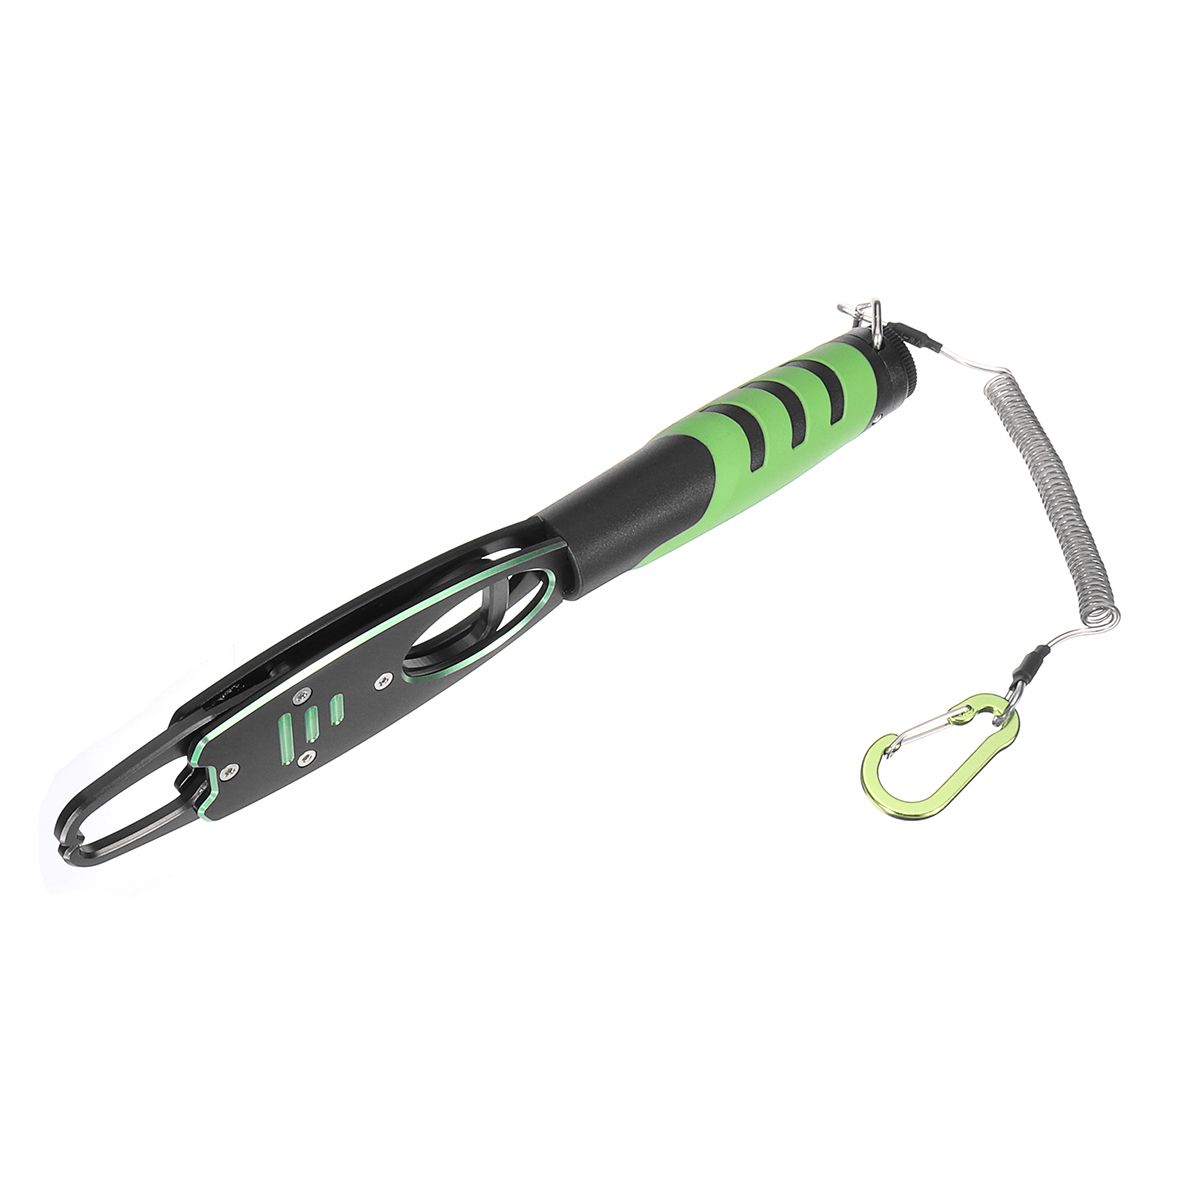 Portable-Aluminum-Alloy-Fishing-Grip-Fishing-Pliers-Split-Ring-Cutters-Line-Hook-Recover-Fishing-Tac-1586129